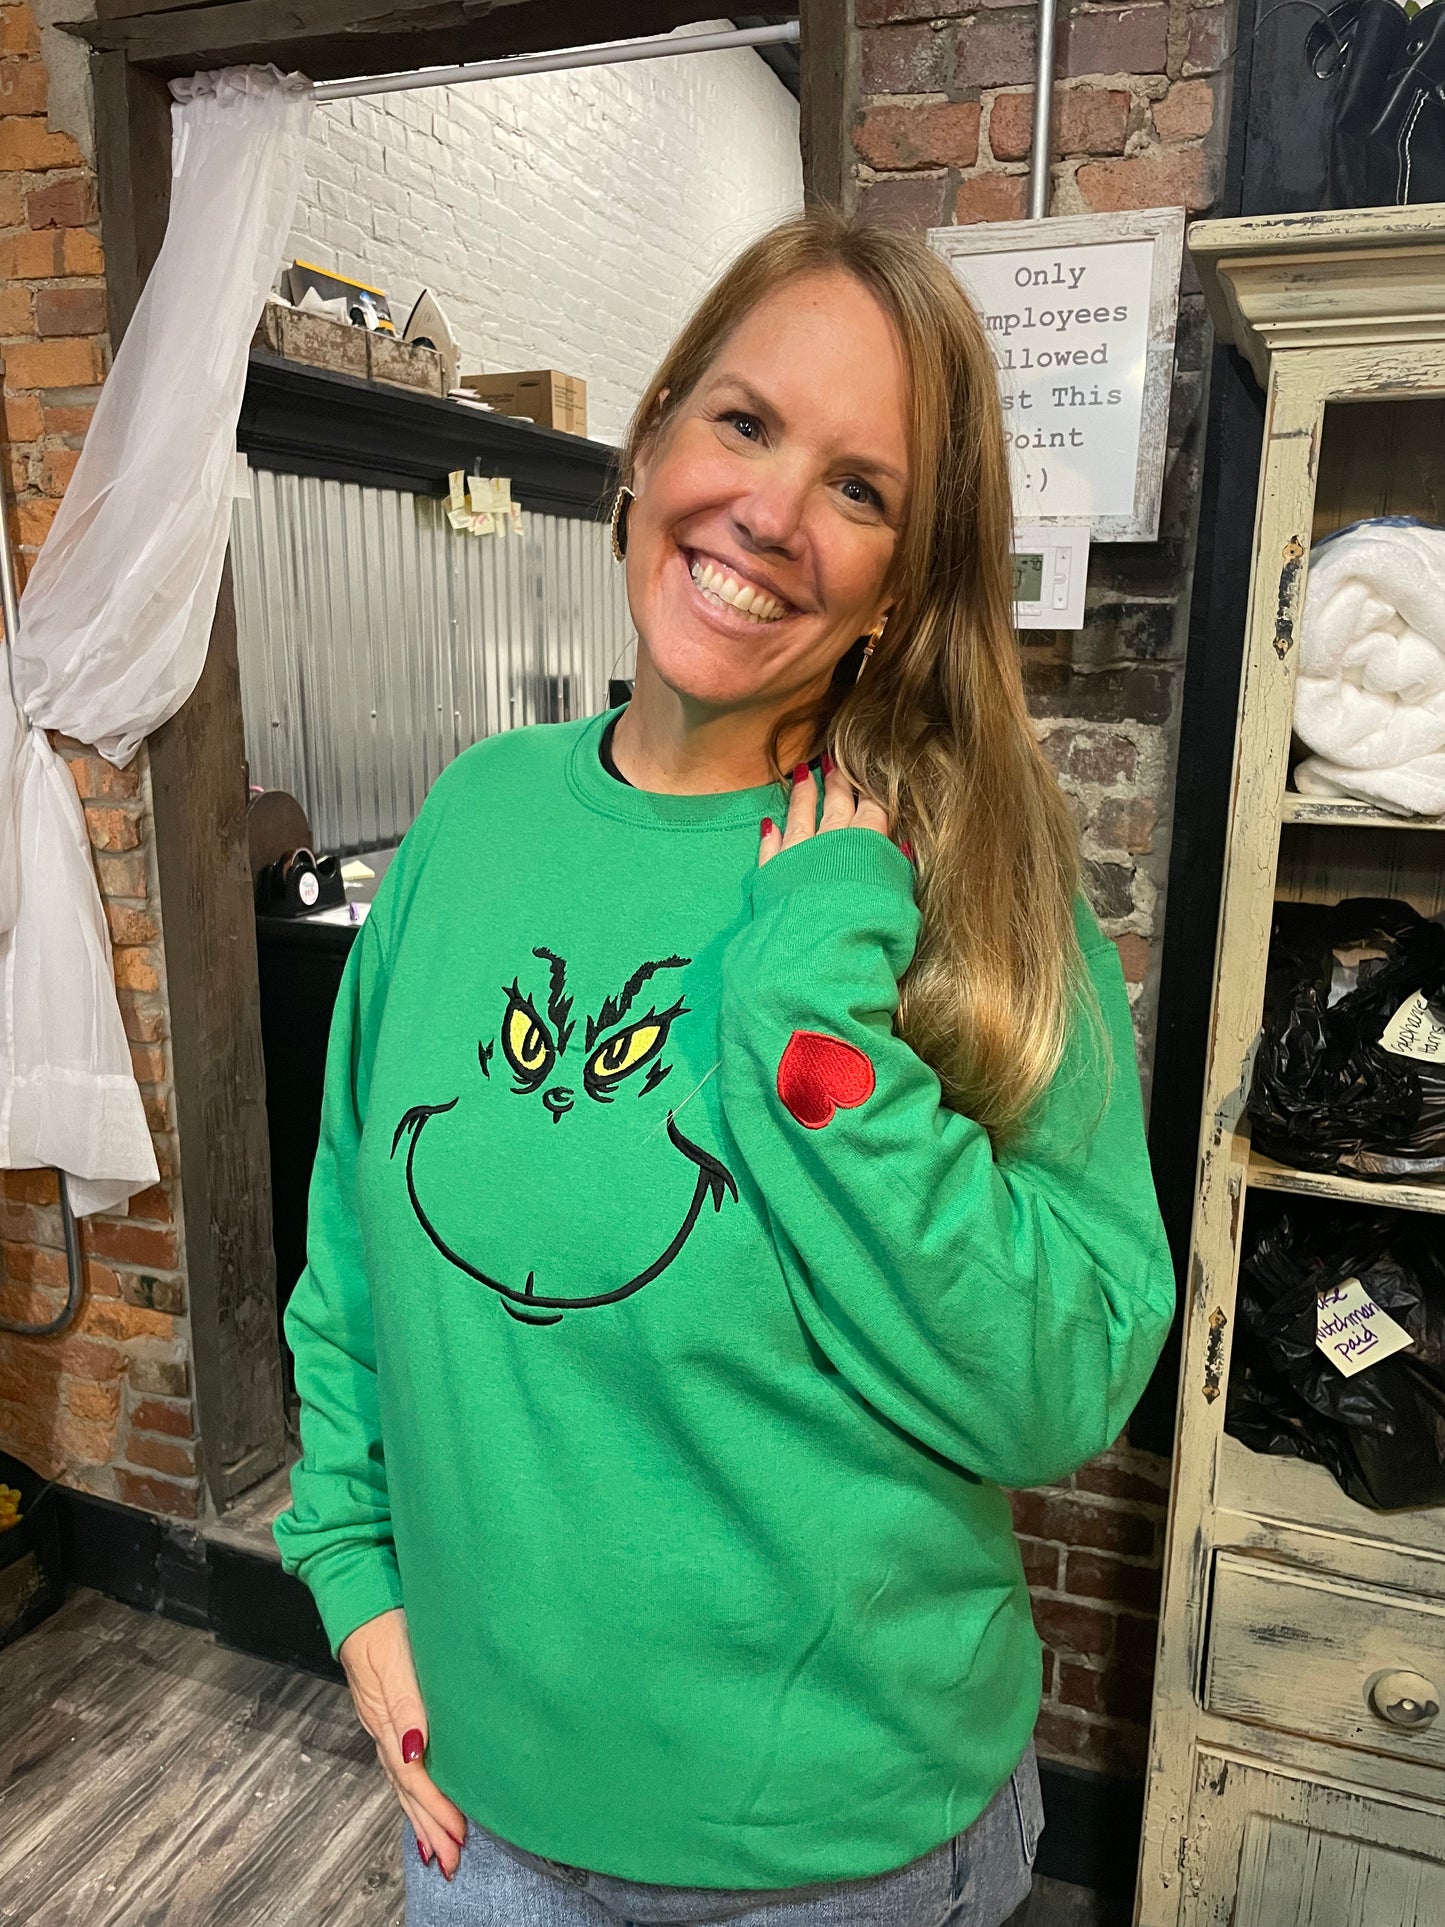 The Mean Green Man Sweatshirt (with heart on sleeve)